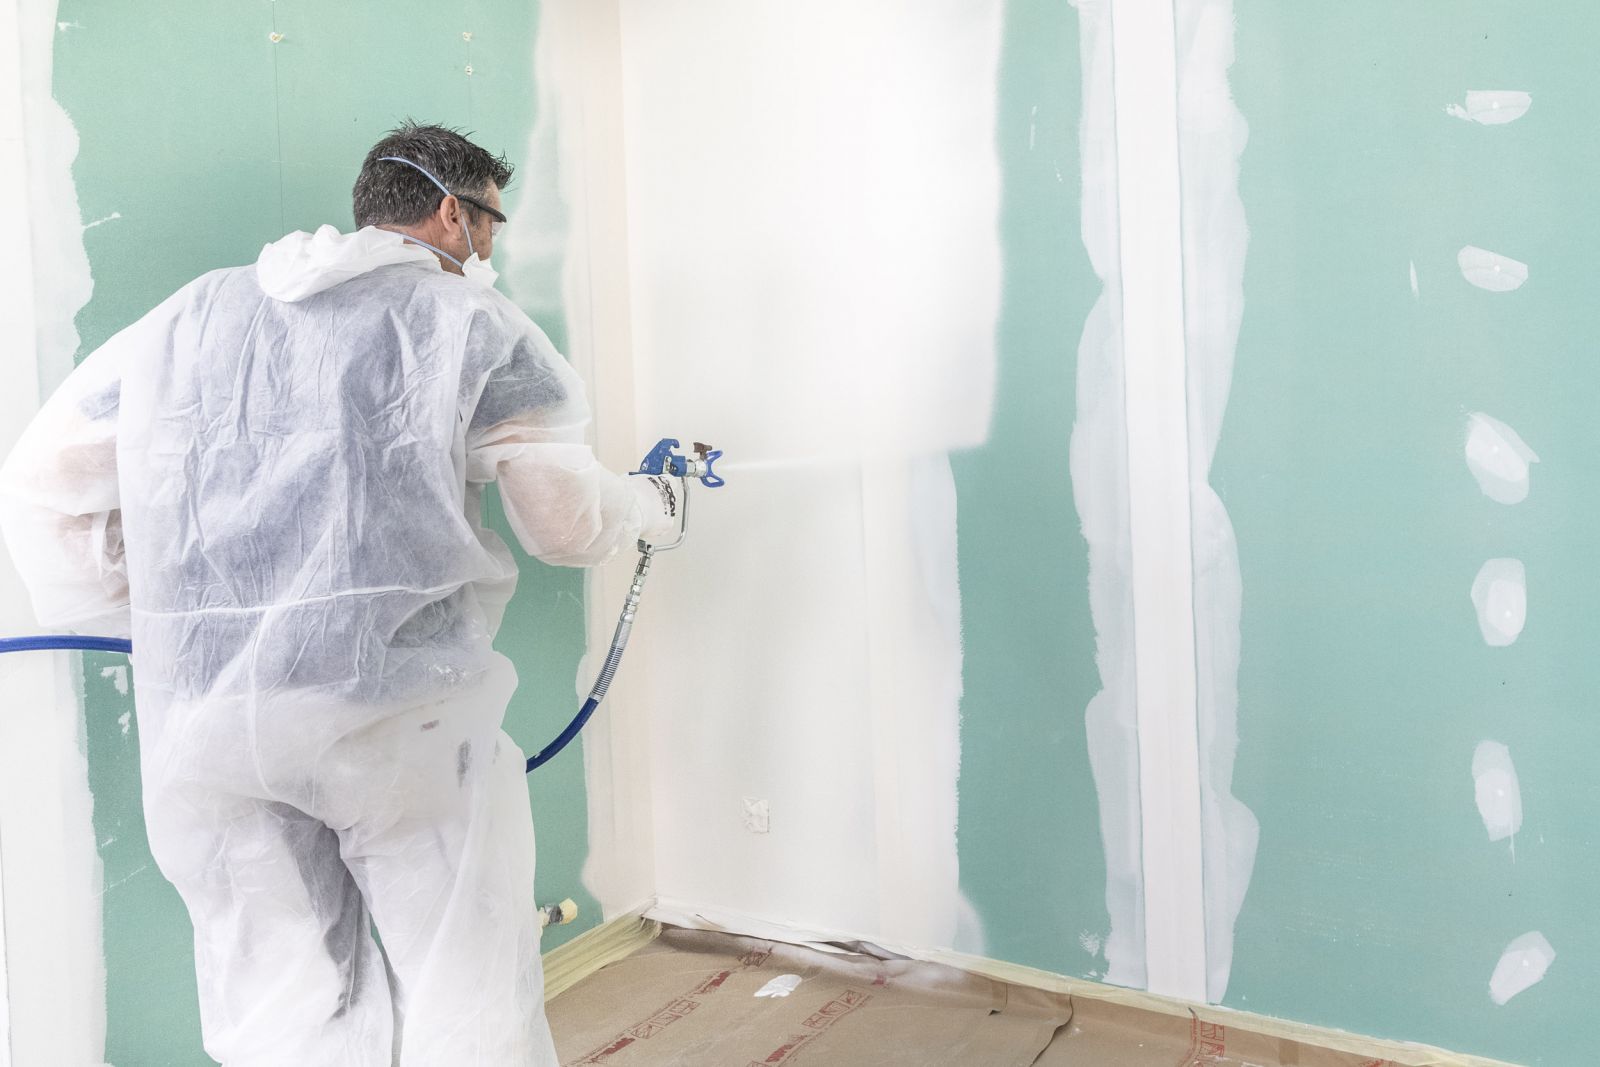 Airless spray plastering: the efficient way to plaster